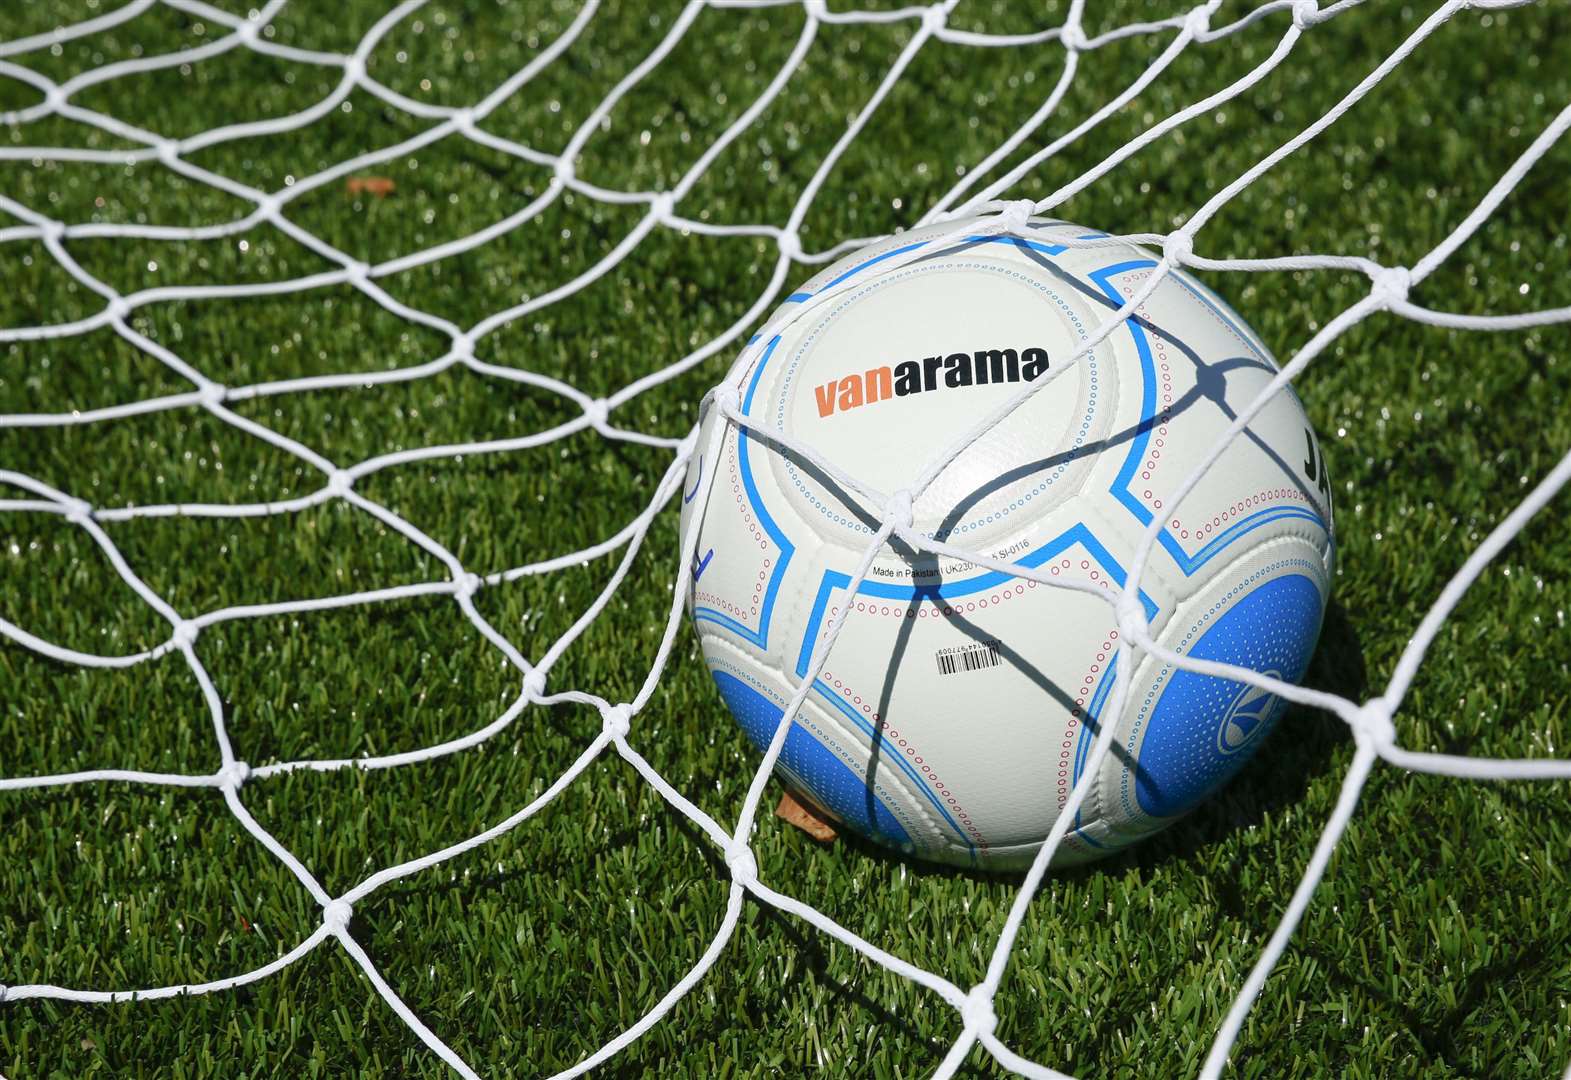 Football fixtures and results - Saturday October 13 to Wednesday October 17